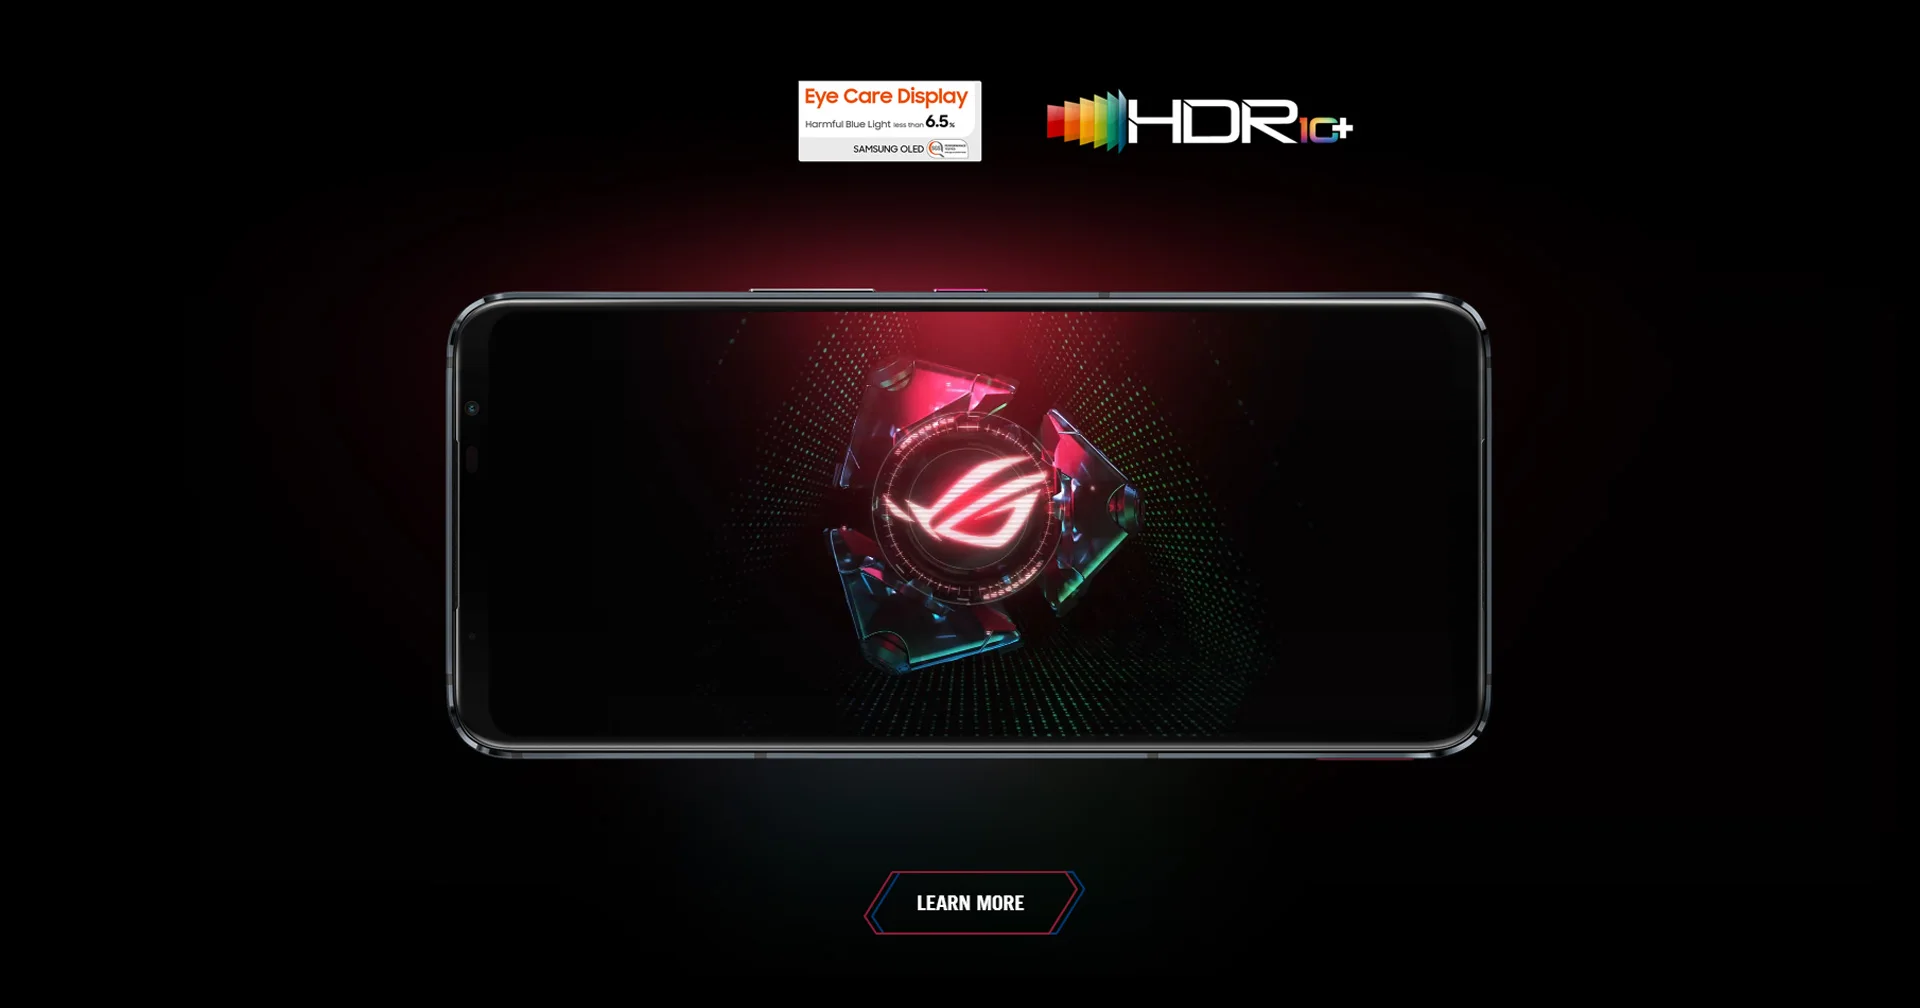 ram pc Global Firmware ASUS ROG 5S 5G Gaming MobilePhone 6.78 inch 144Hz AMOLED Snapdragon 888 Octa Core 64MP Camera WiFi 6 laptop ram